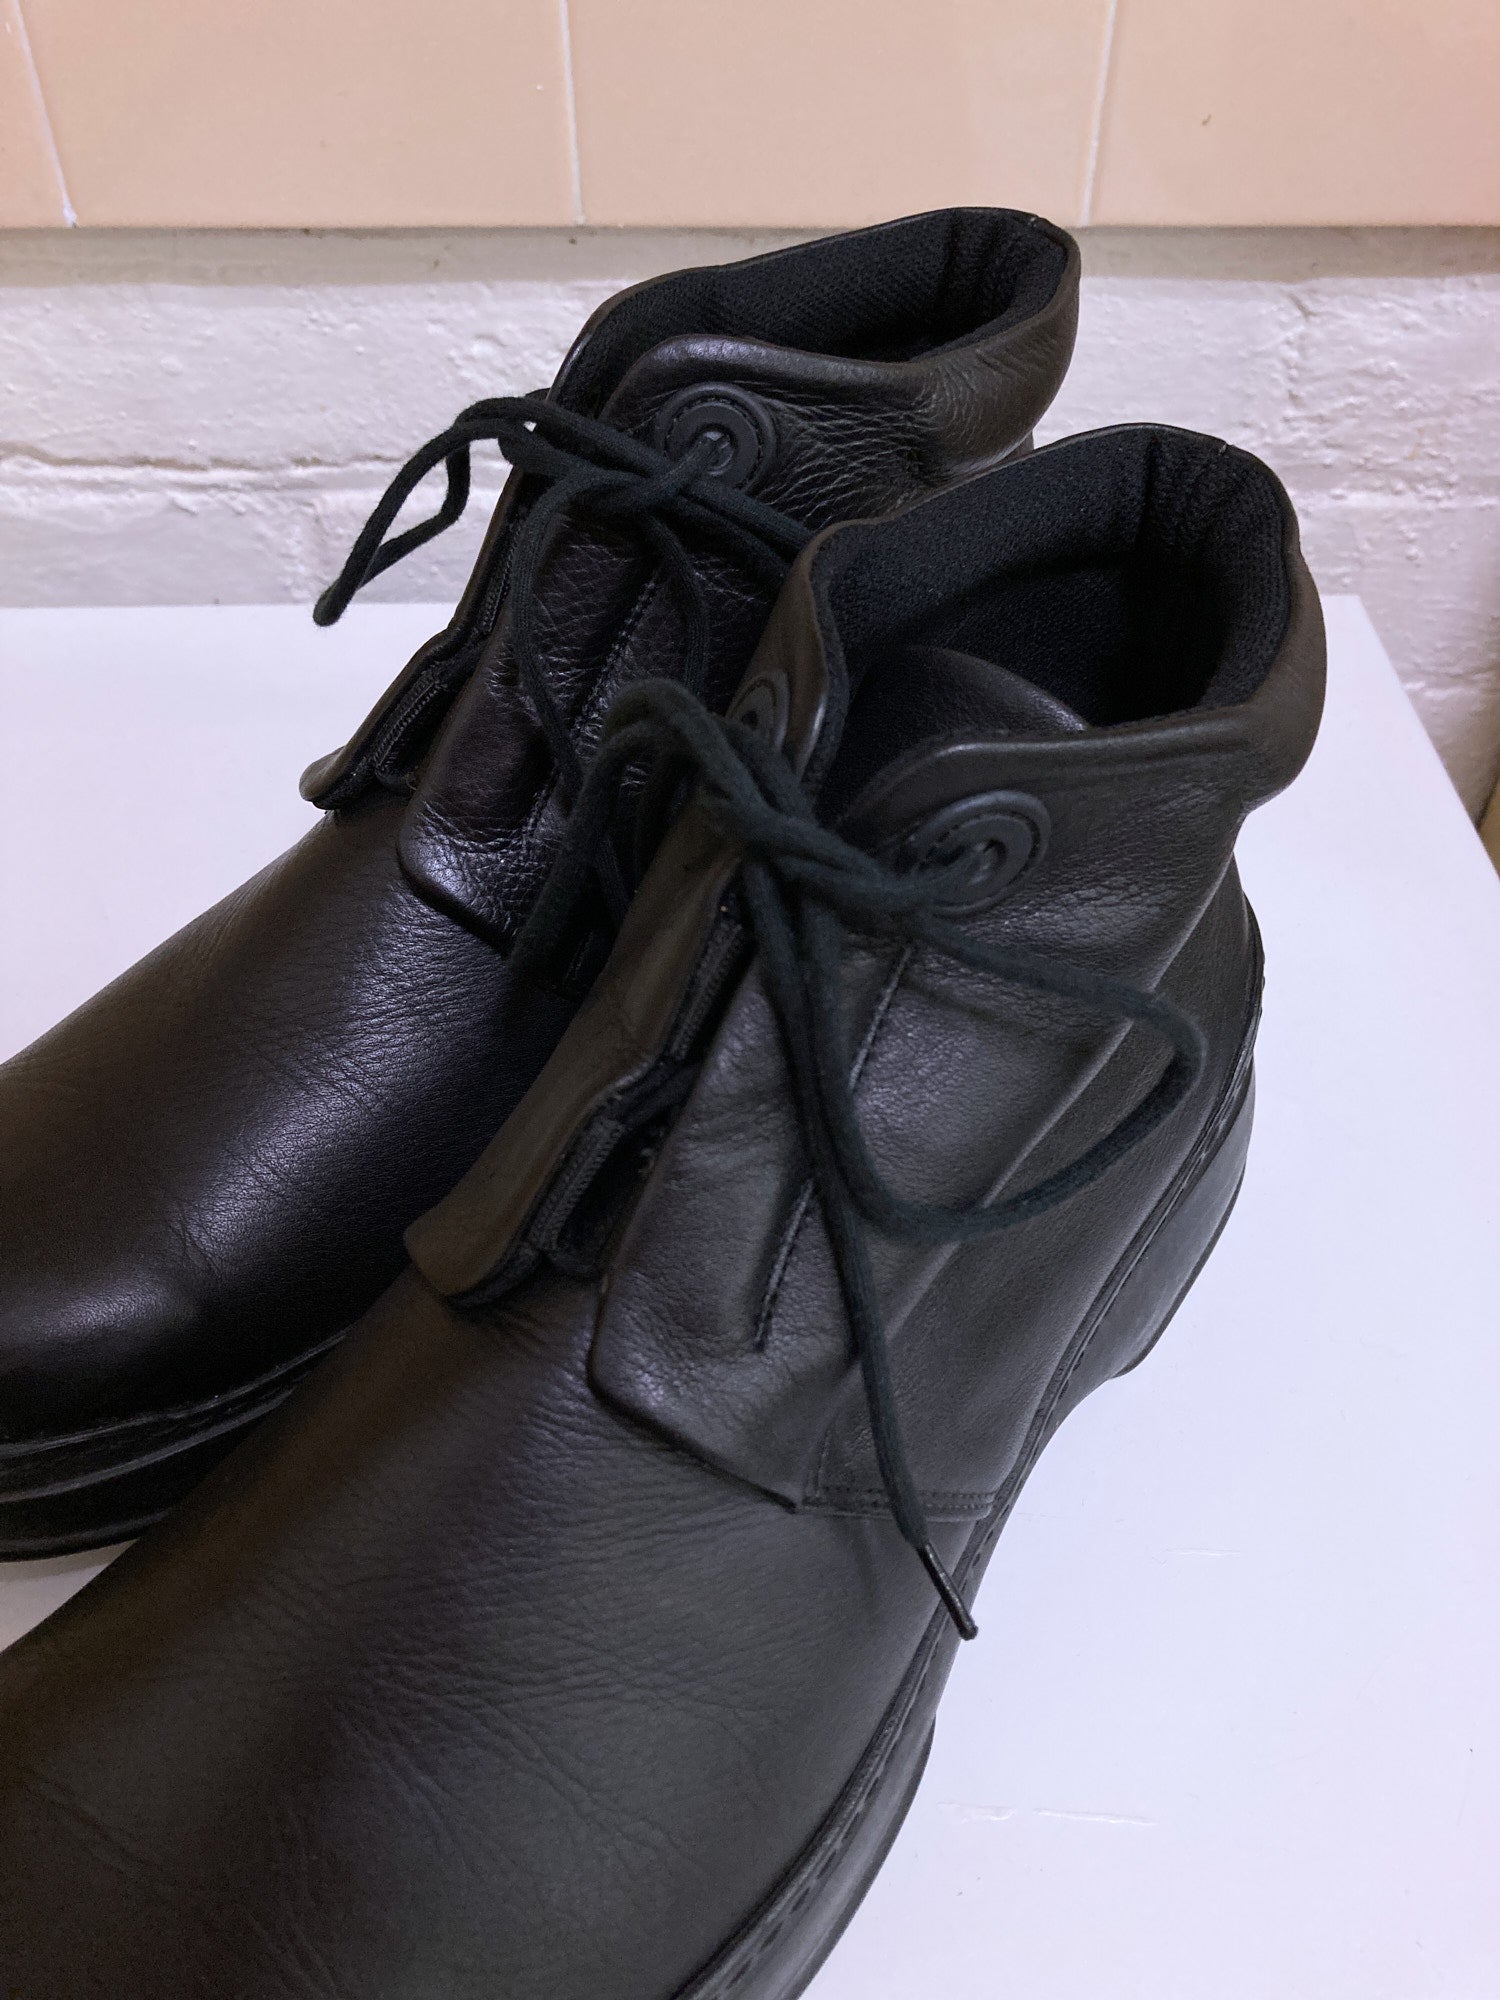 Kenzo Homme 1990s black leather chukka boots - size 43